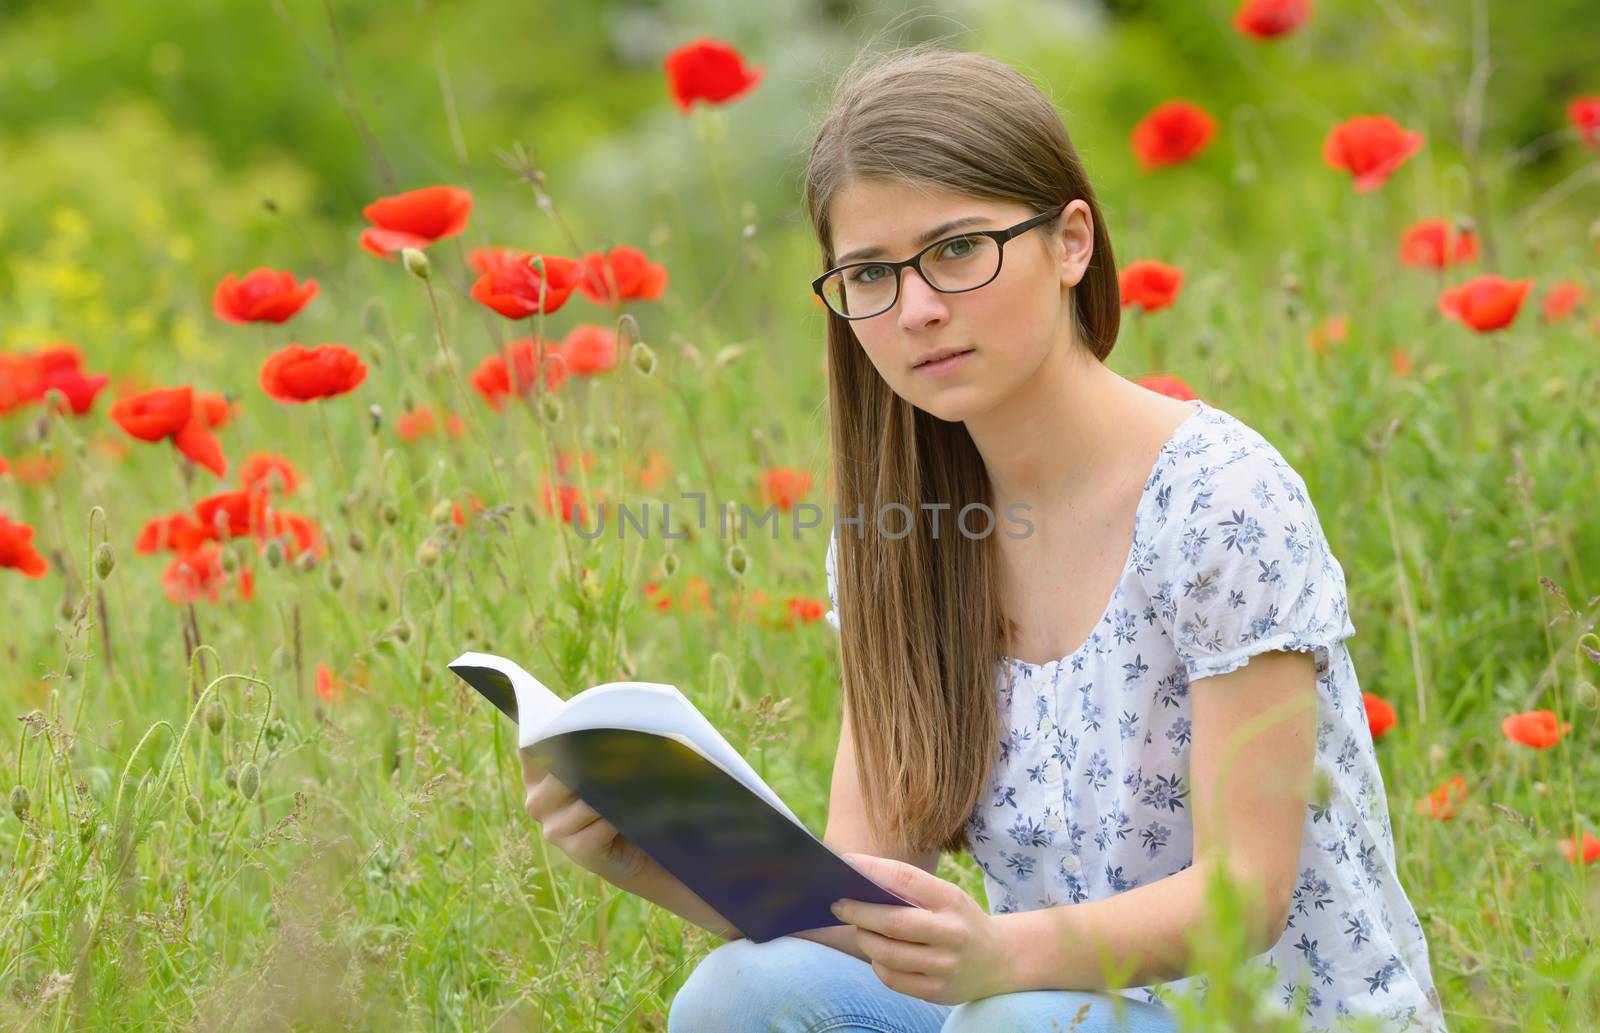 Teen girl reading book in the poppies field